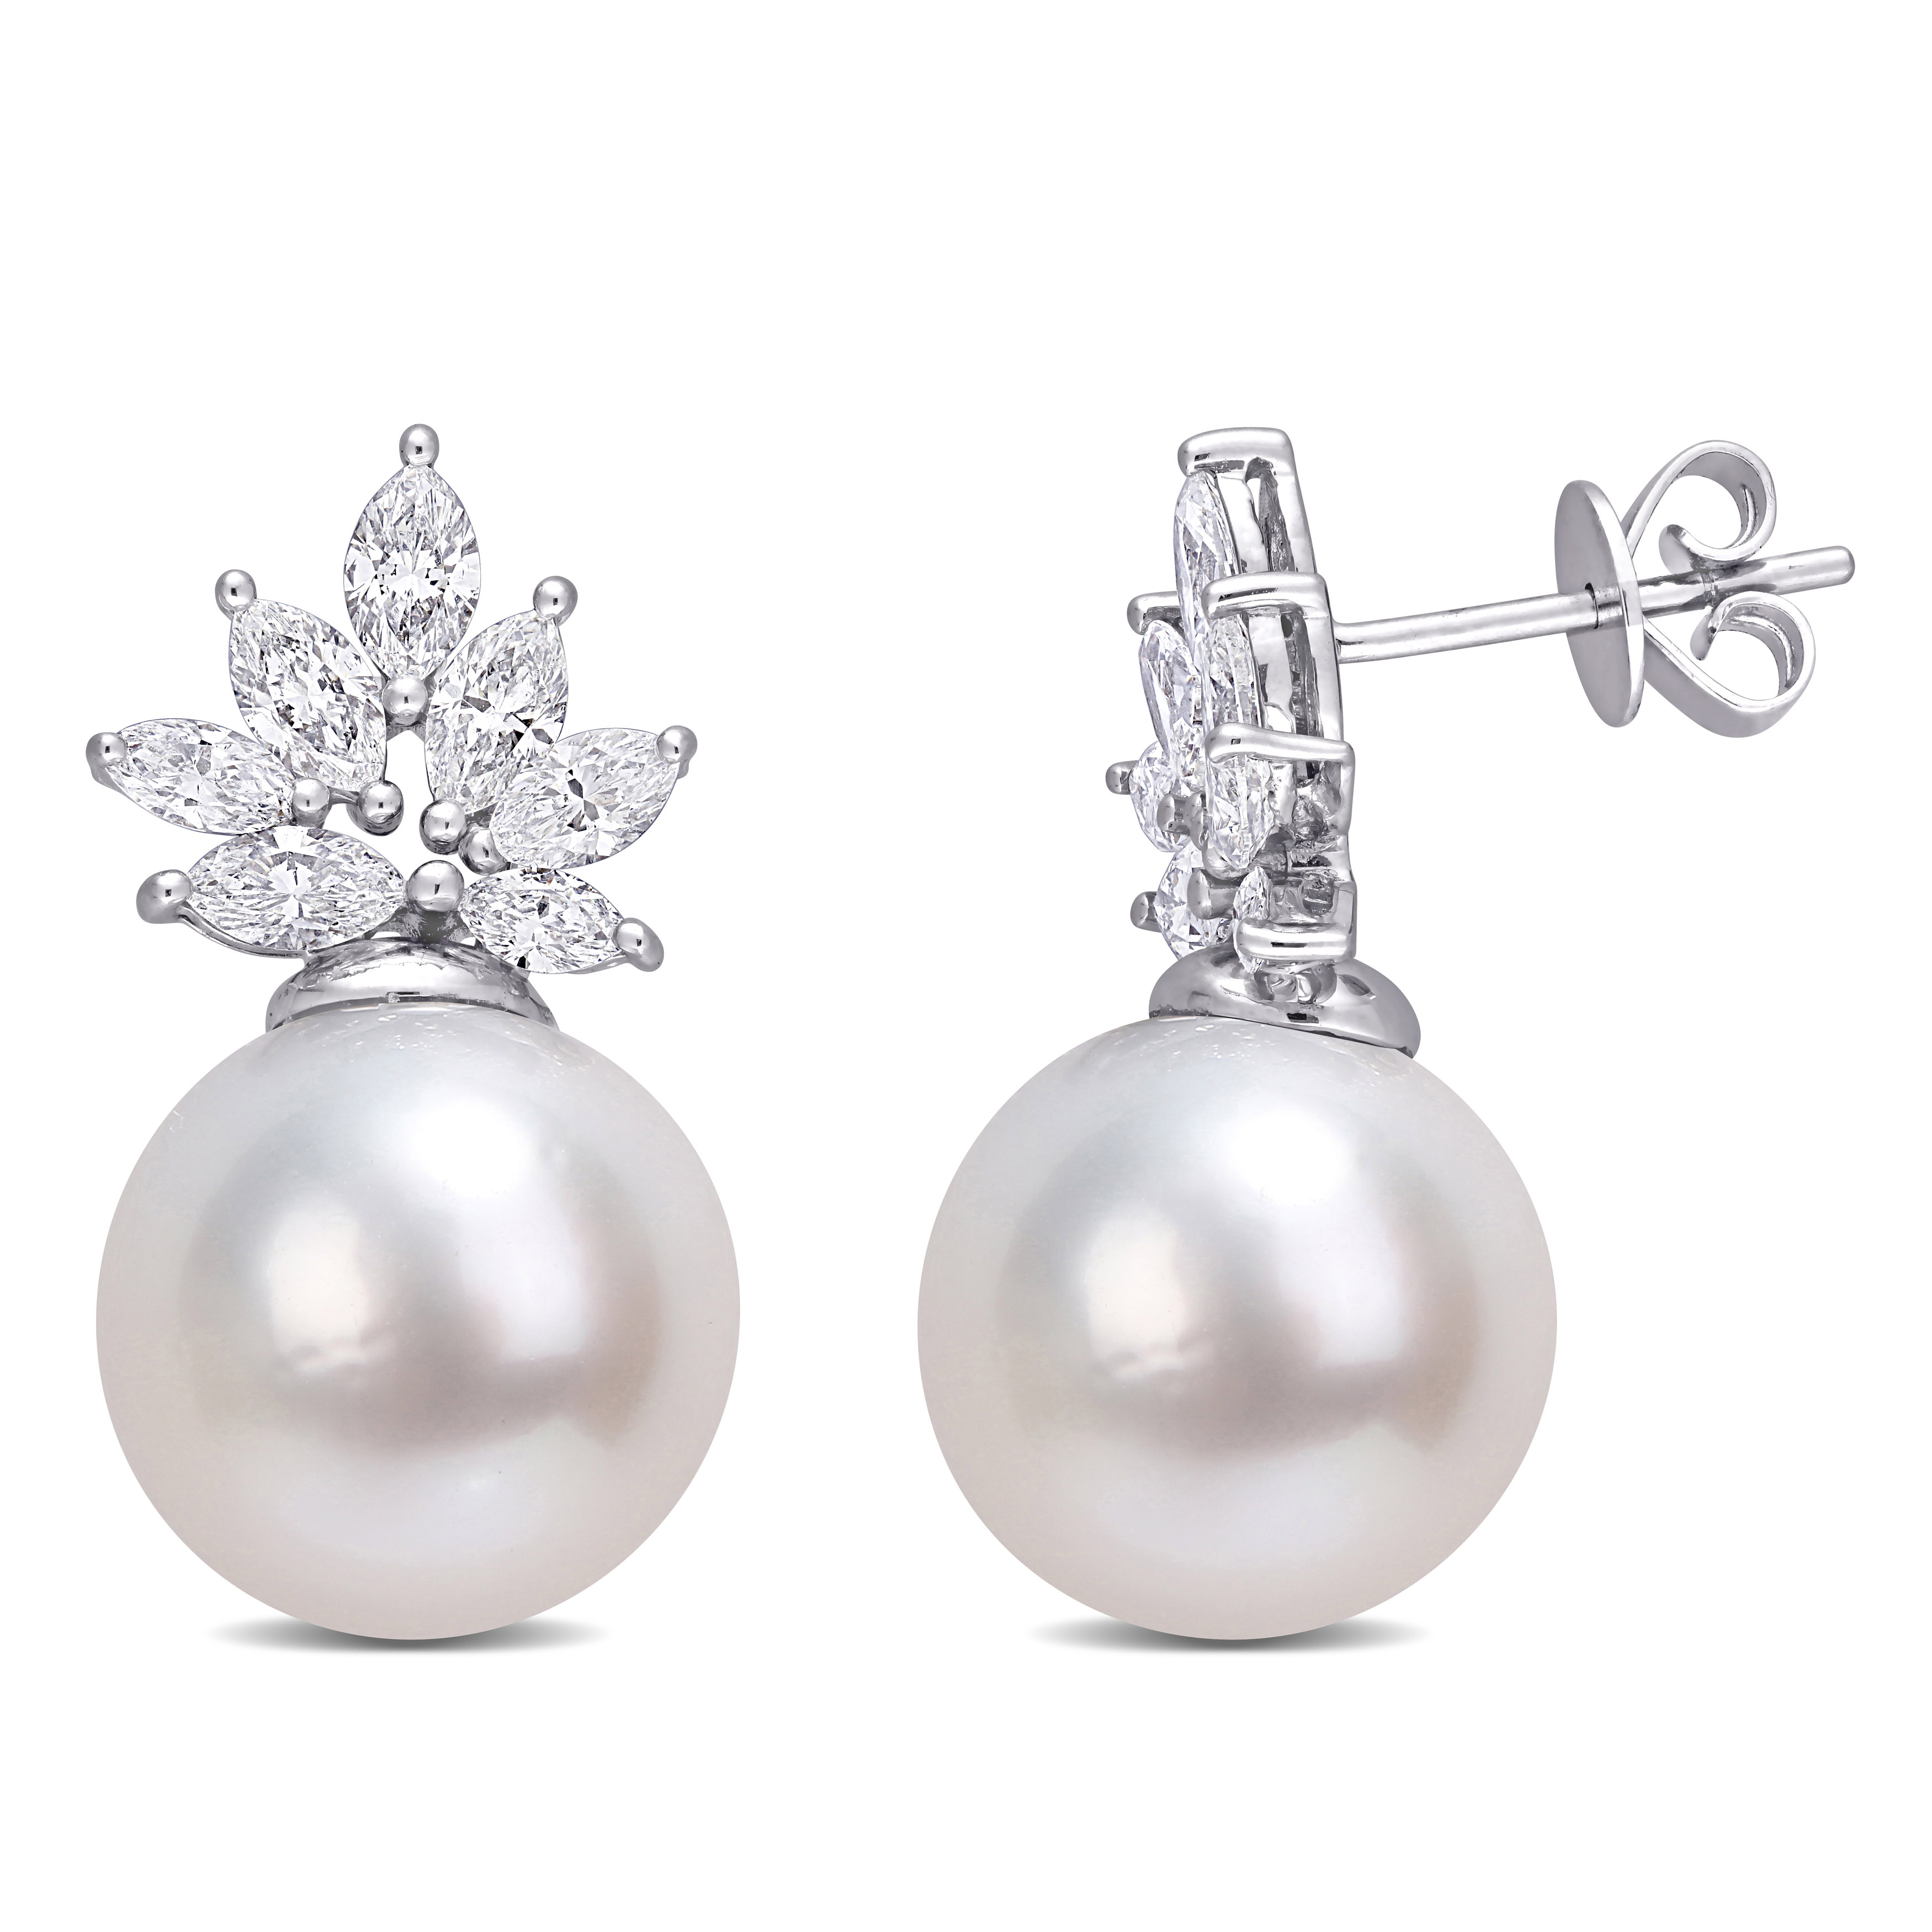 11-12 MM South Sea Cultured Pearl and 1 1/2 CT TW Diamond Cluster Earrings in 14k White Gold